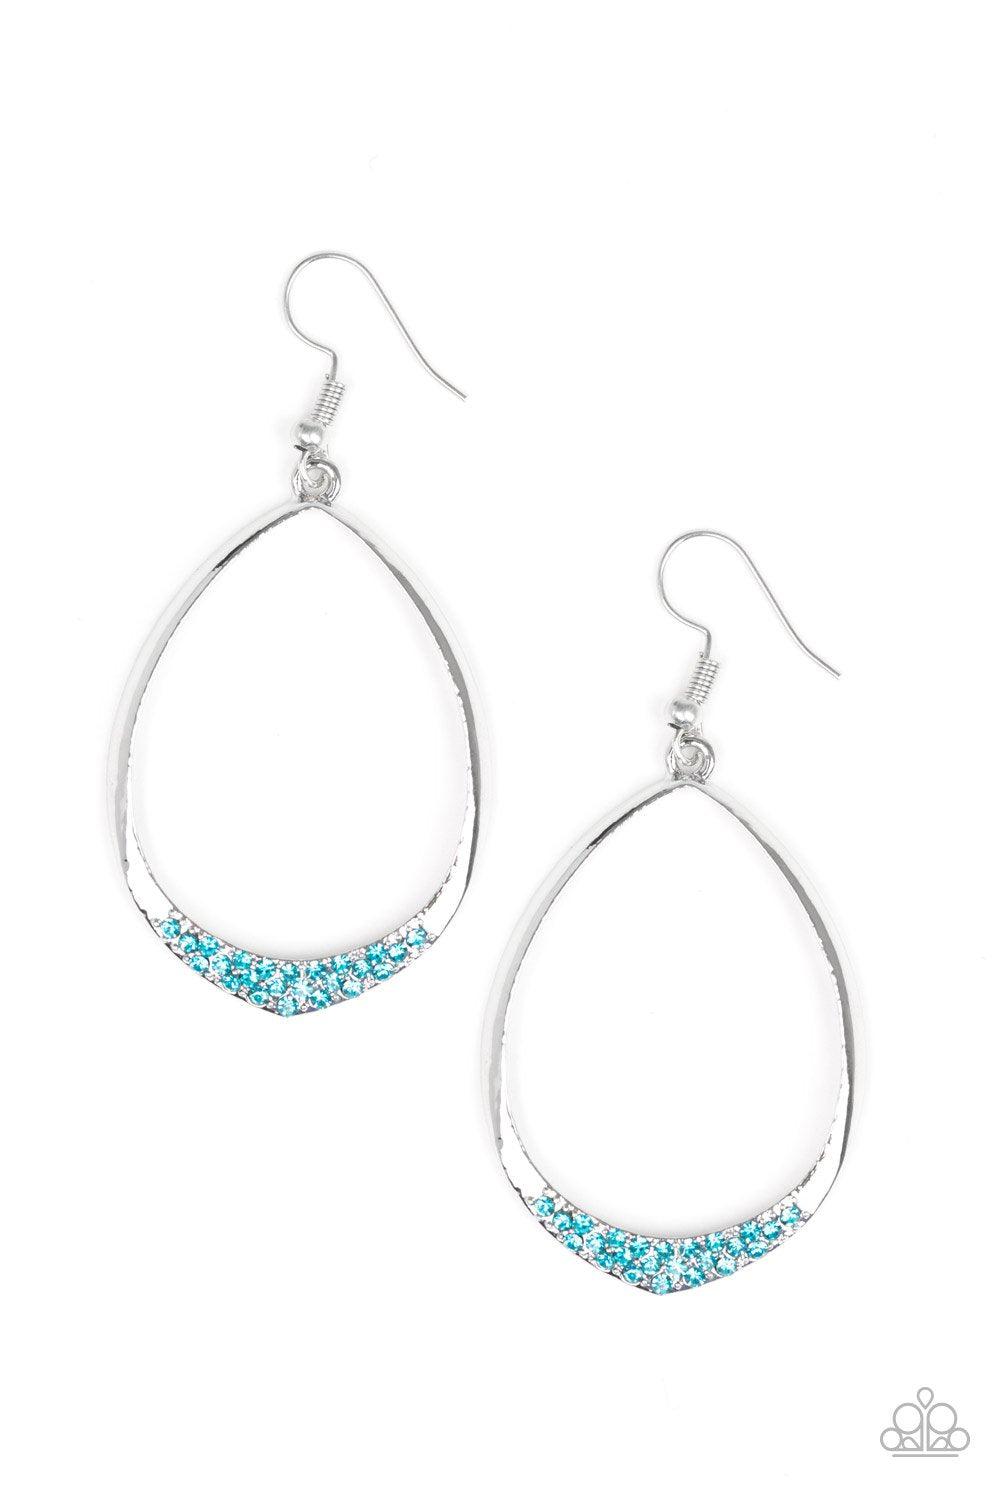 REIGN Down Blue and Silver Earrings - Paparazzi Accessories-CarasShop.com - $5 Jewelry by Cara Jewels